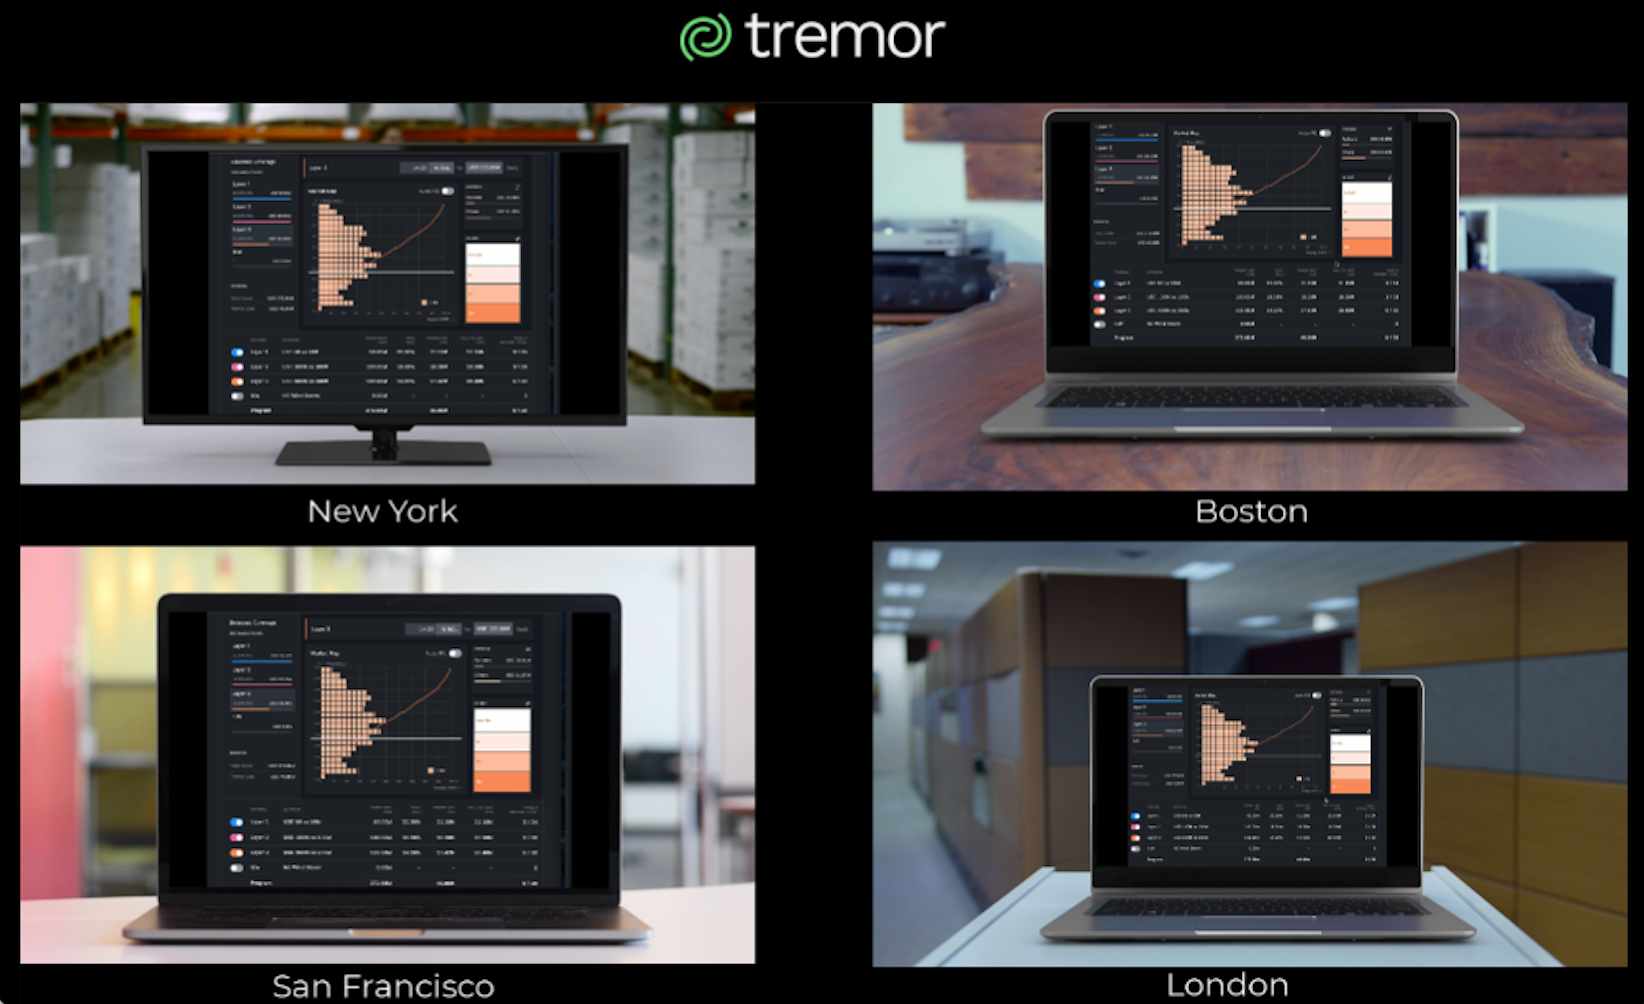 Tremor enables real-time collaboration on reinsurance placements